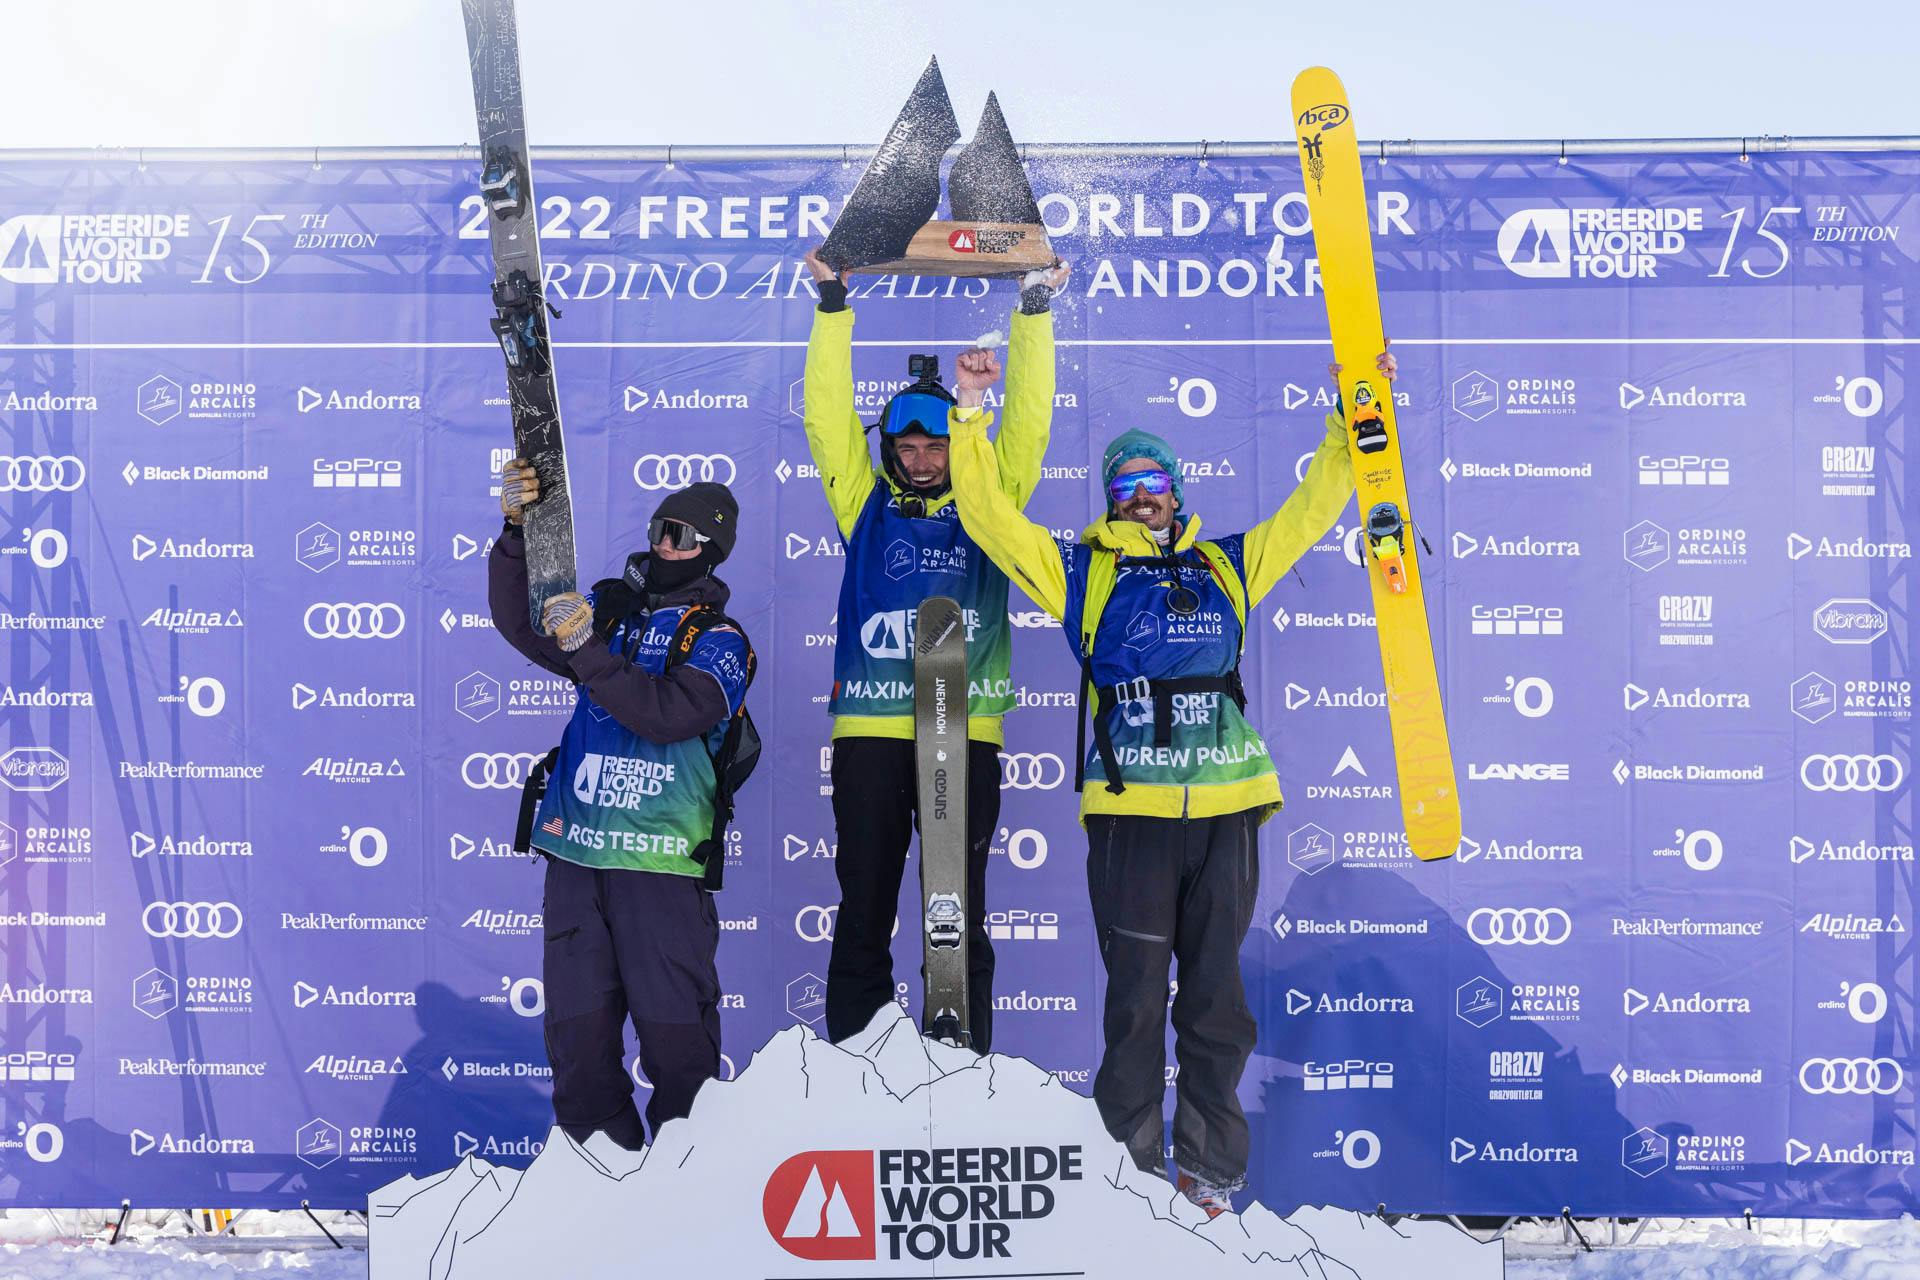 The three male winners stand on the podium and celebrate. They're backdropped by a purple FWT background.